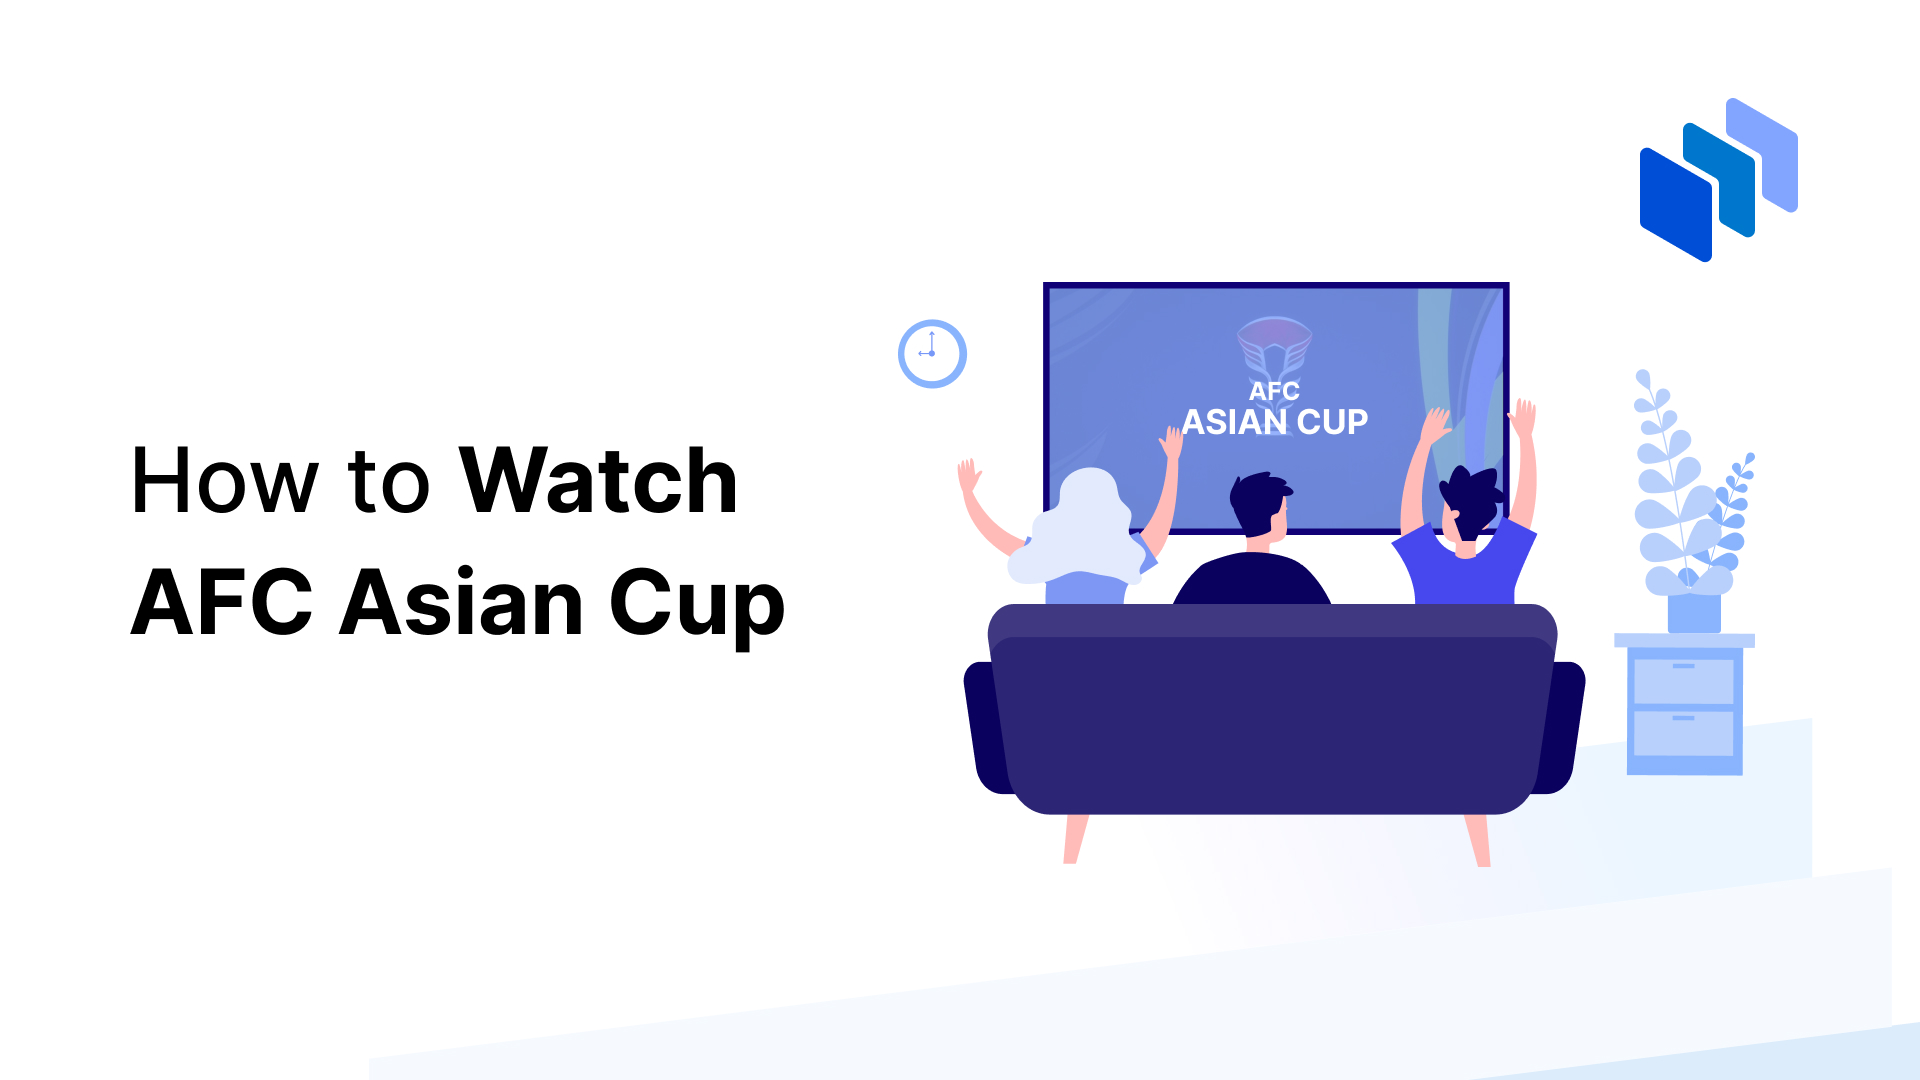 How to Watch AFC Asian Cup